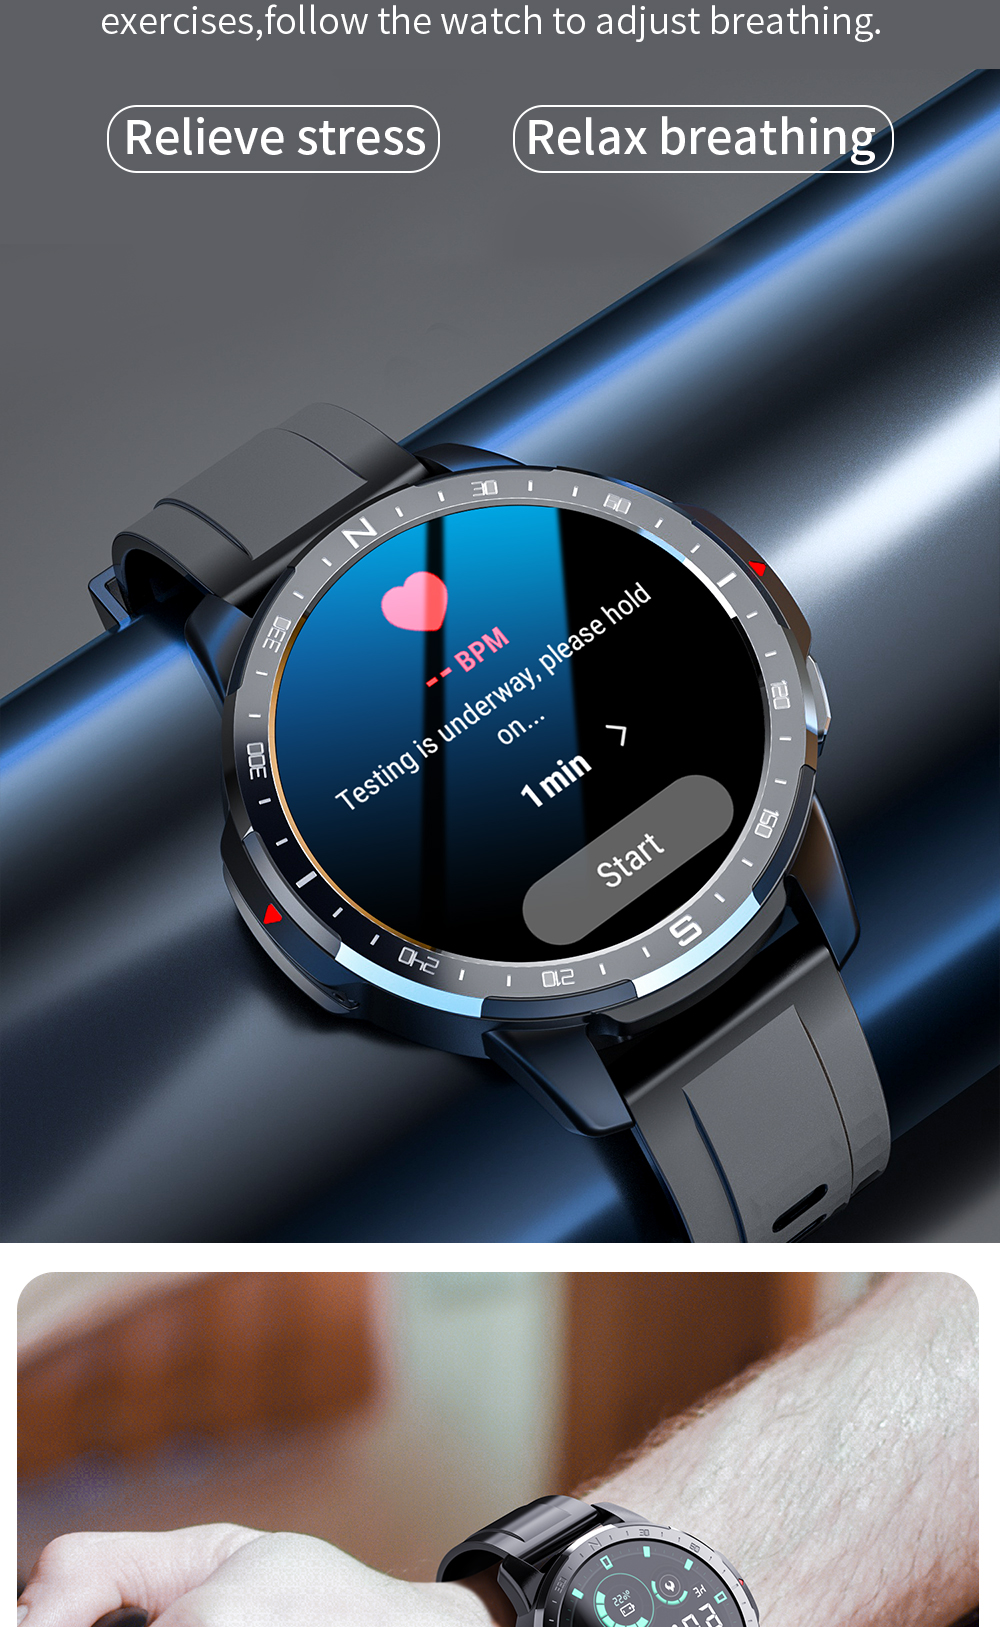 [Dual Mode Dual Chip]LOKMAT APPLLP 7 1.6 inch 400*400px Screen Octa-core 2G+16G Android Smartwatch SIM Card WiFi GPS Positioning 4G LTE Smart Watch Phone